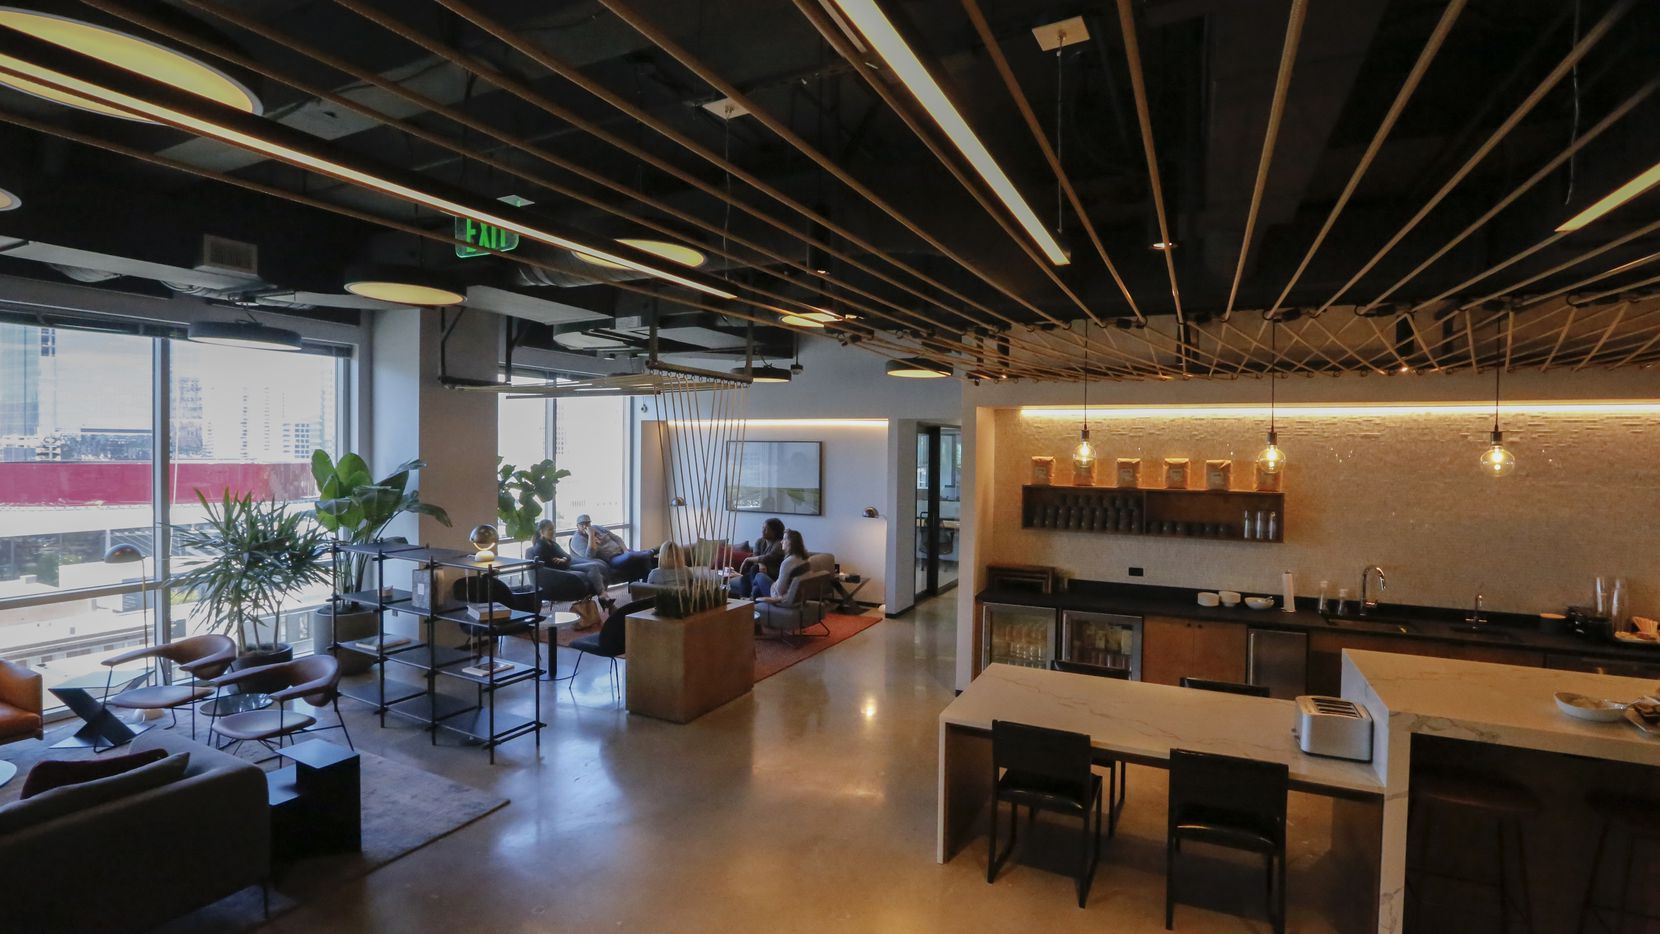 Coworking companies are growing their footprint in Dallas and across .